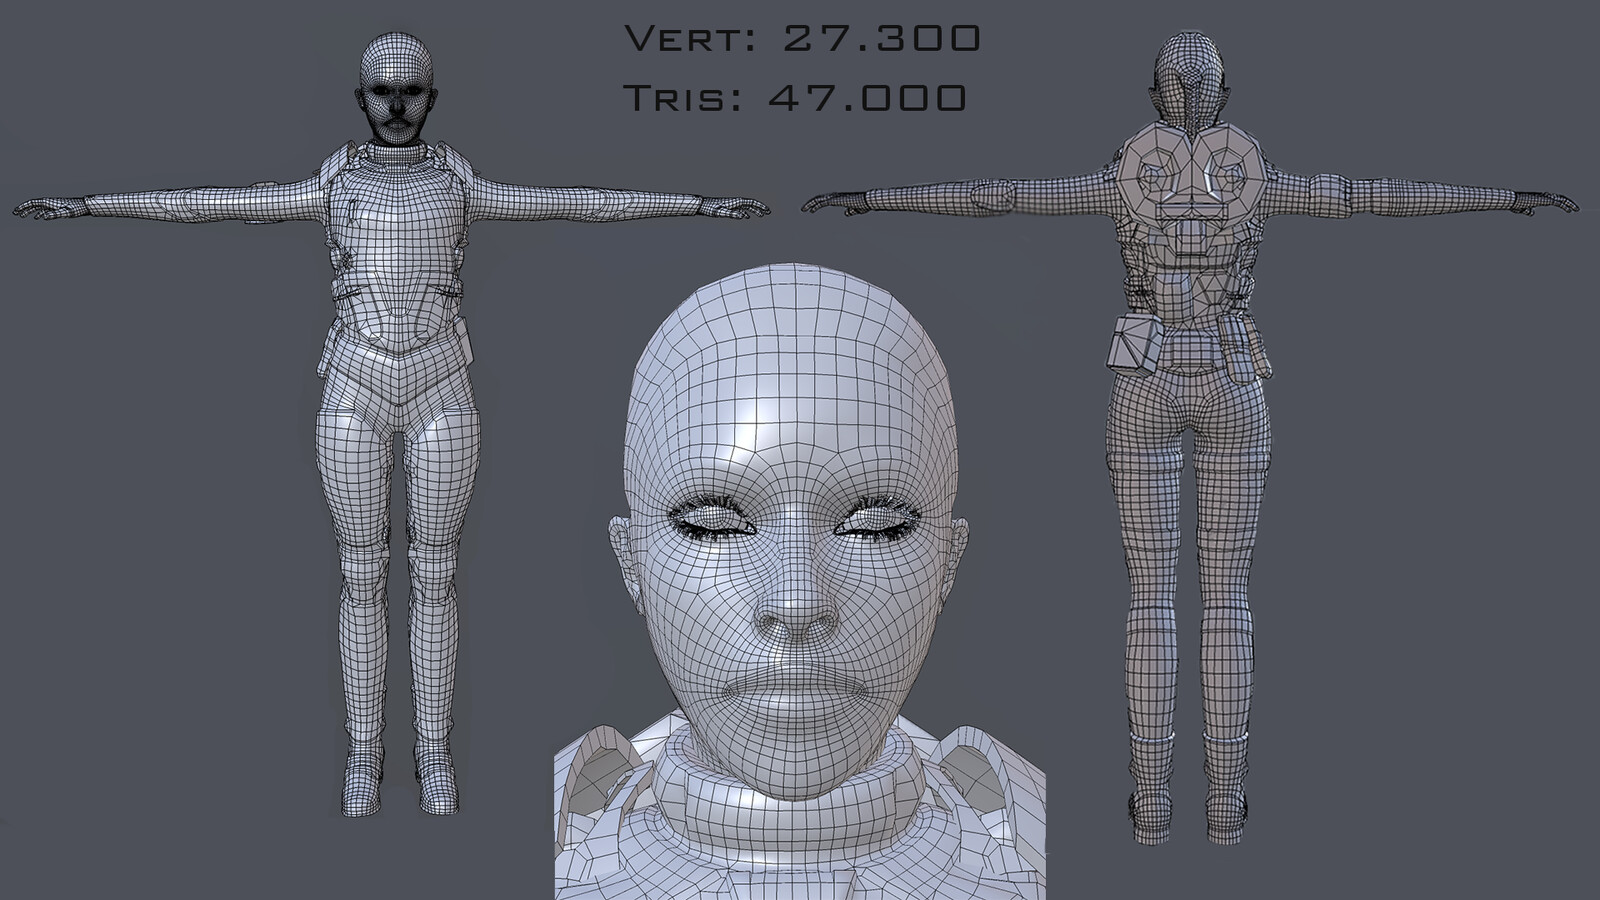 Vertices total count: 27 300 